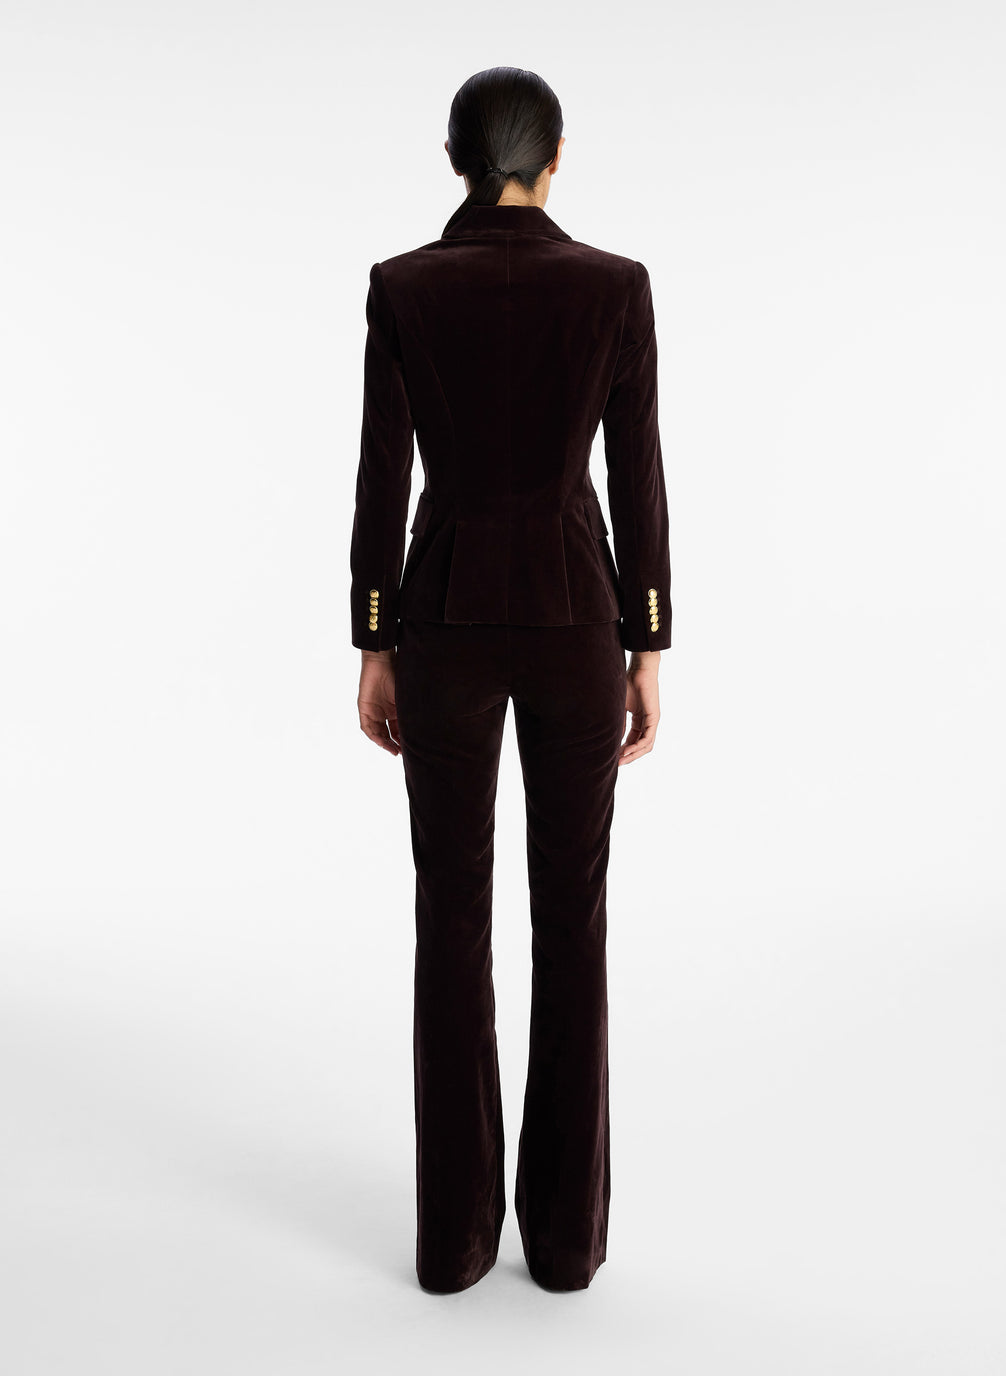 back view of woman wearing brown velvet jacket with gold buttons and brown velvet flared pants